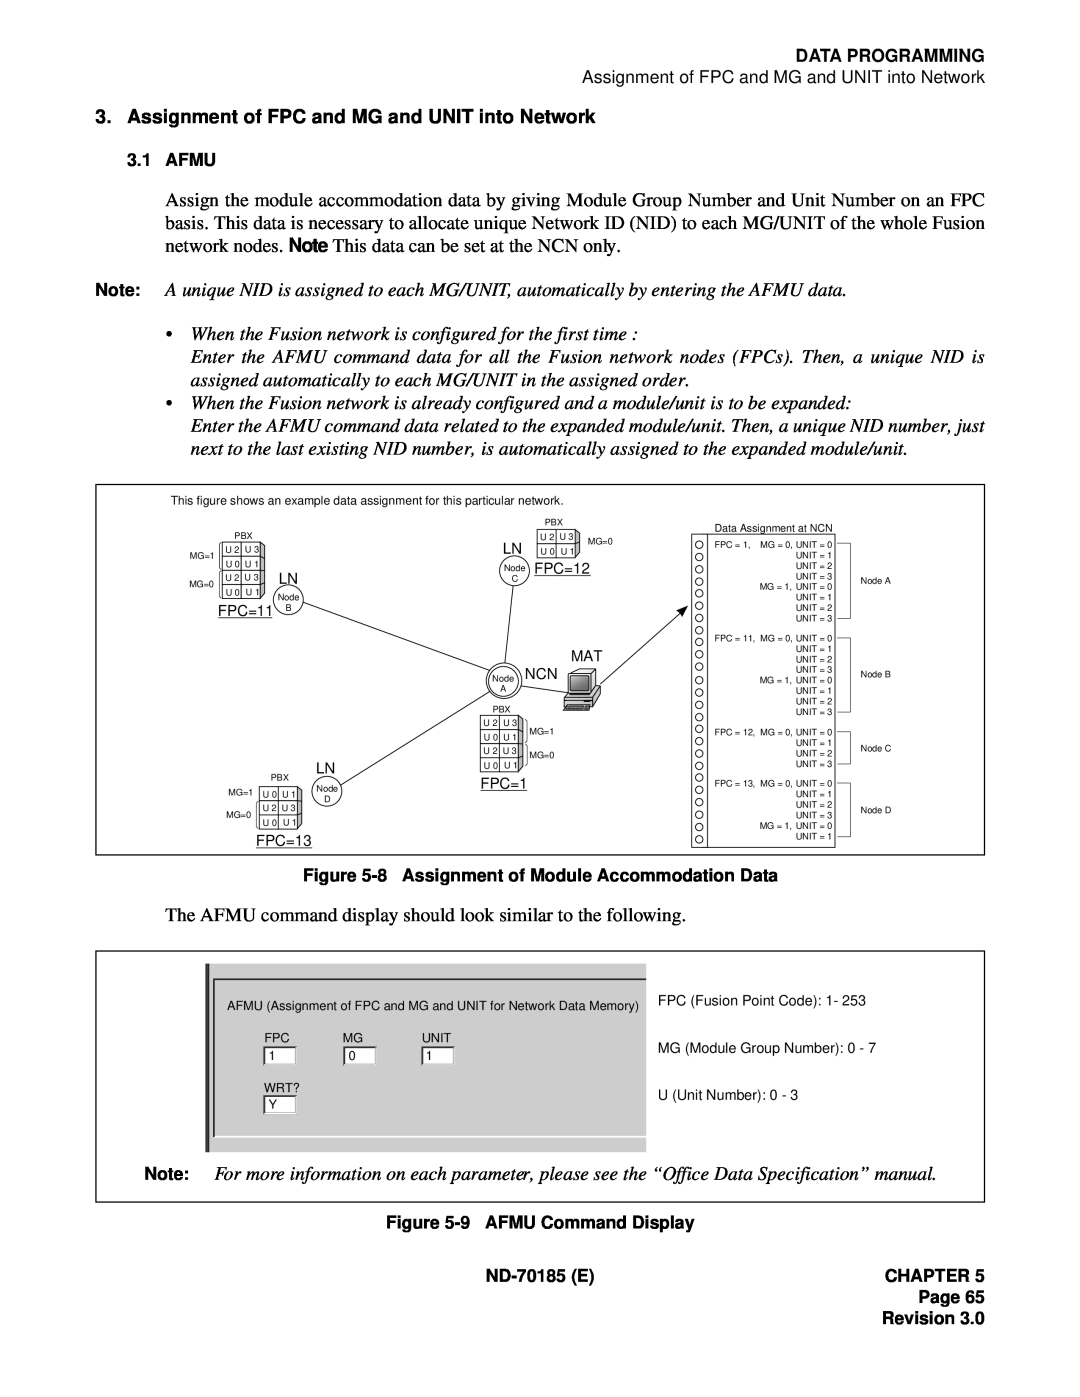 NEC NEAX2400 system manual Assignment of FPC and MG and UNIT into Network, Data Programming, 3.1AFMU, Page Revision 